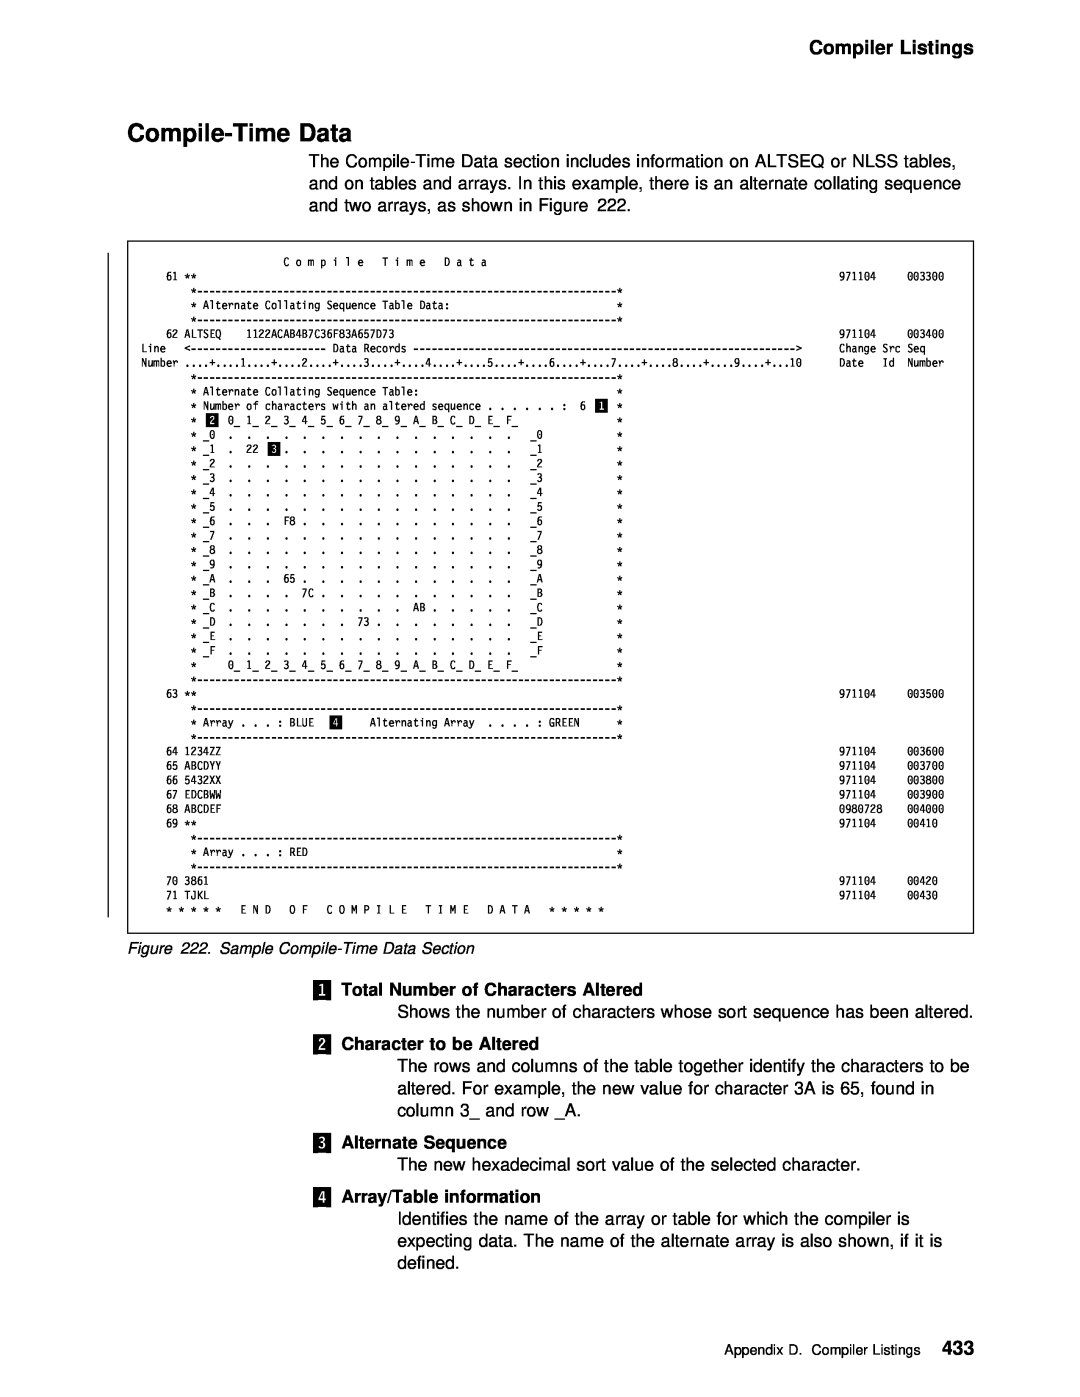 IBM AS/400 manual Compile-Time Data, Compiler Listings, 1/ Total Number of Characters Altered, 2/ Character to be Altered 